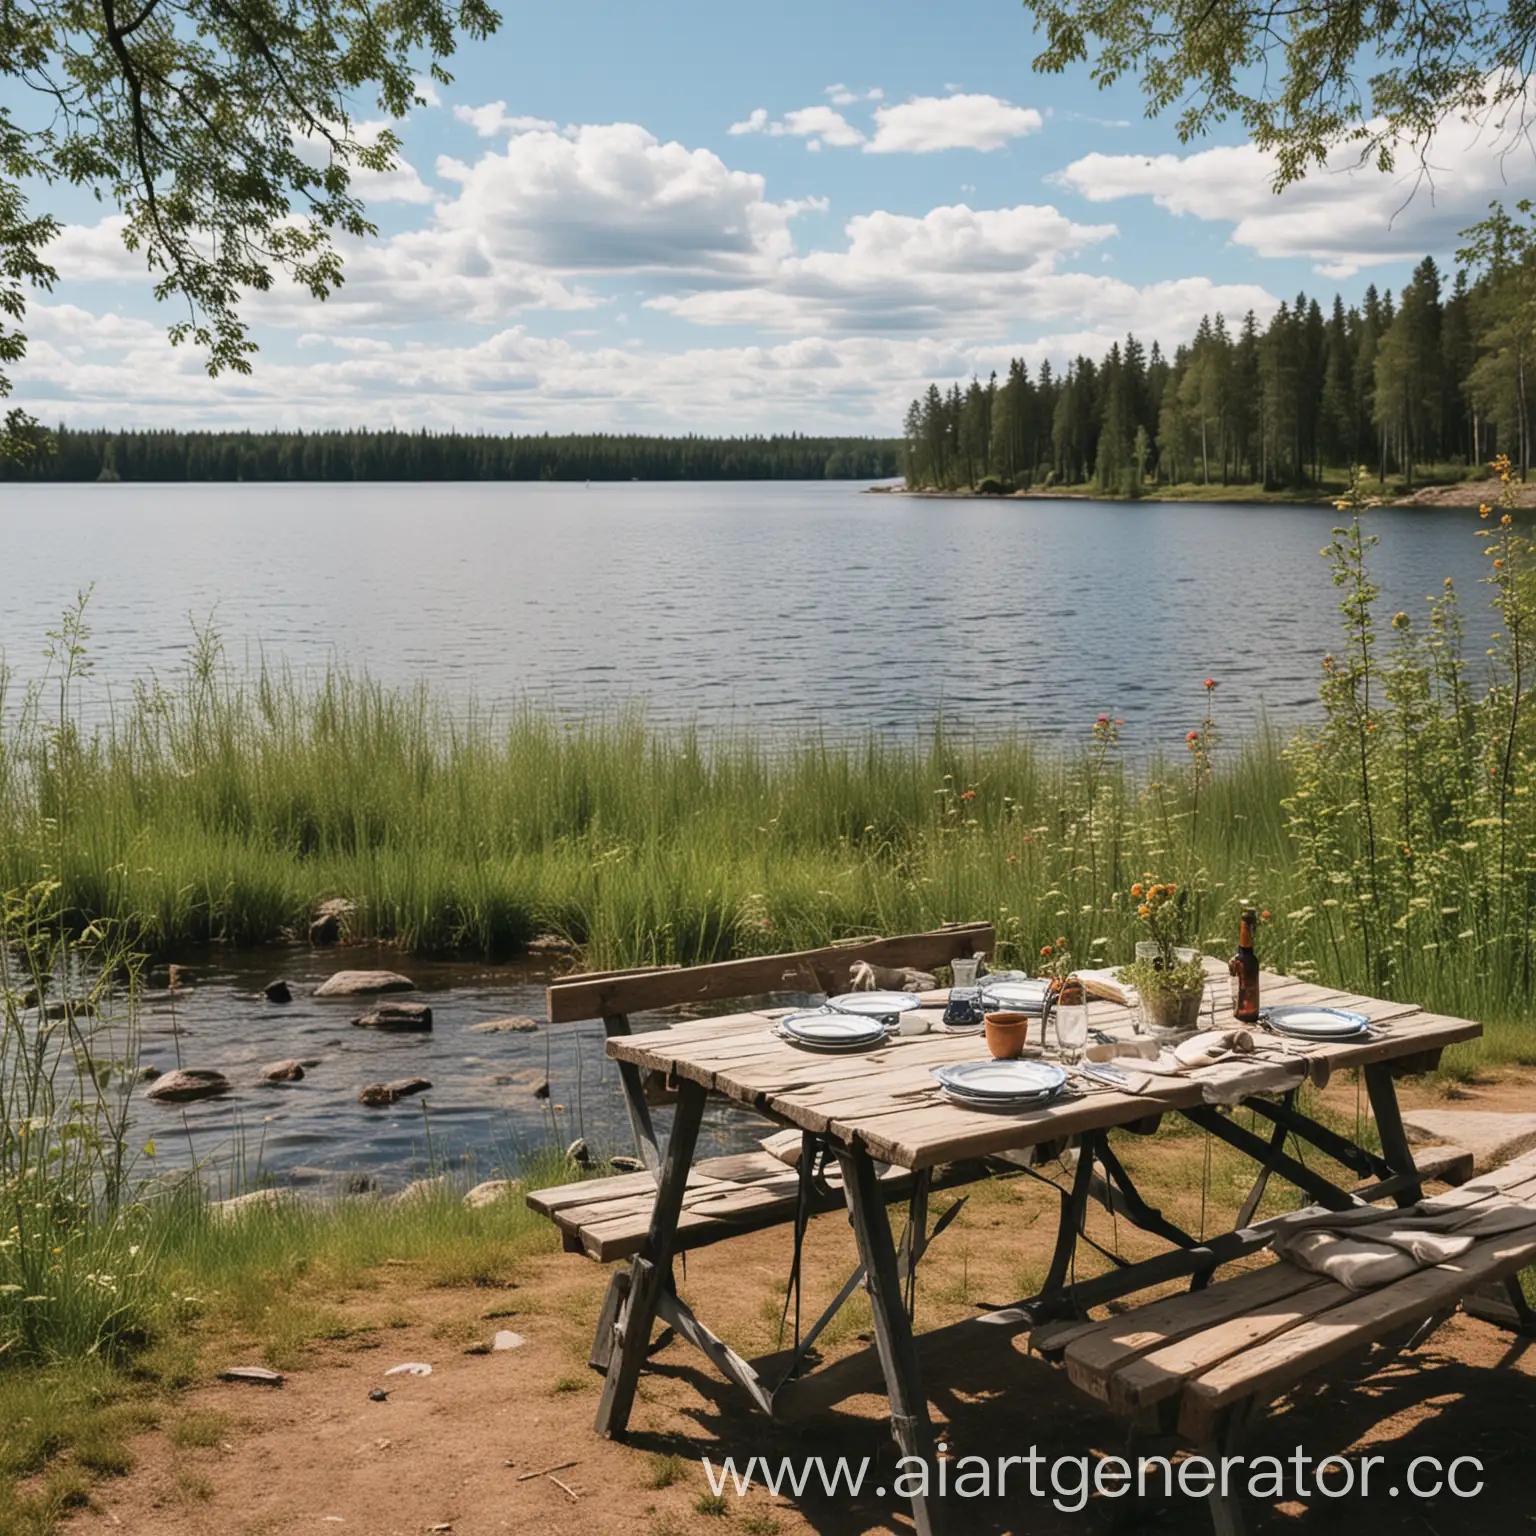 Scenic-Lakeside-Lunch-Spot-in-Finland-Enjoying-Summer-Dining-by-the-Lake